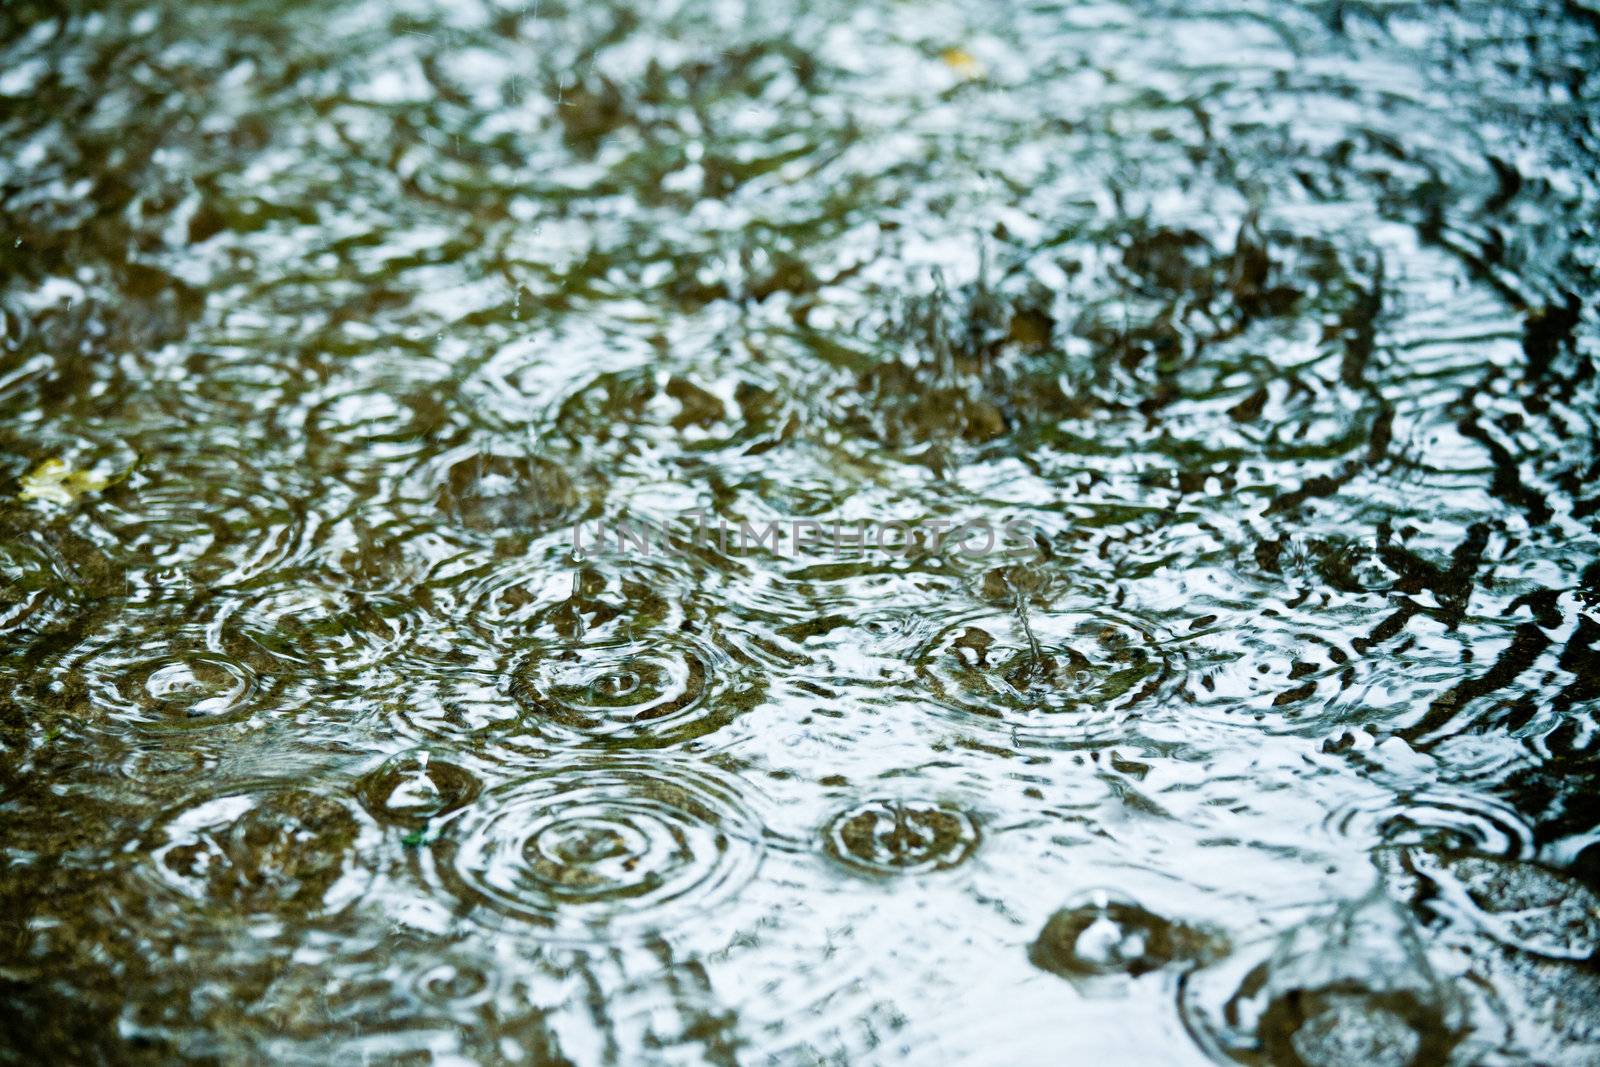 Rain drops rippling in a puddle